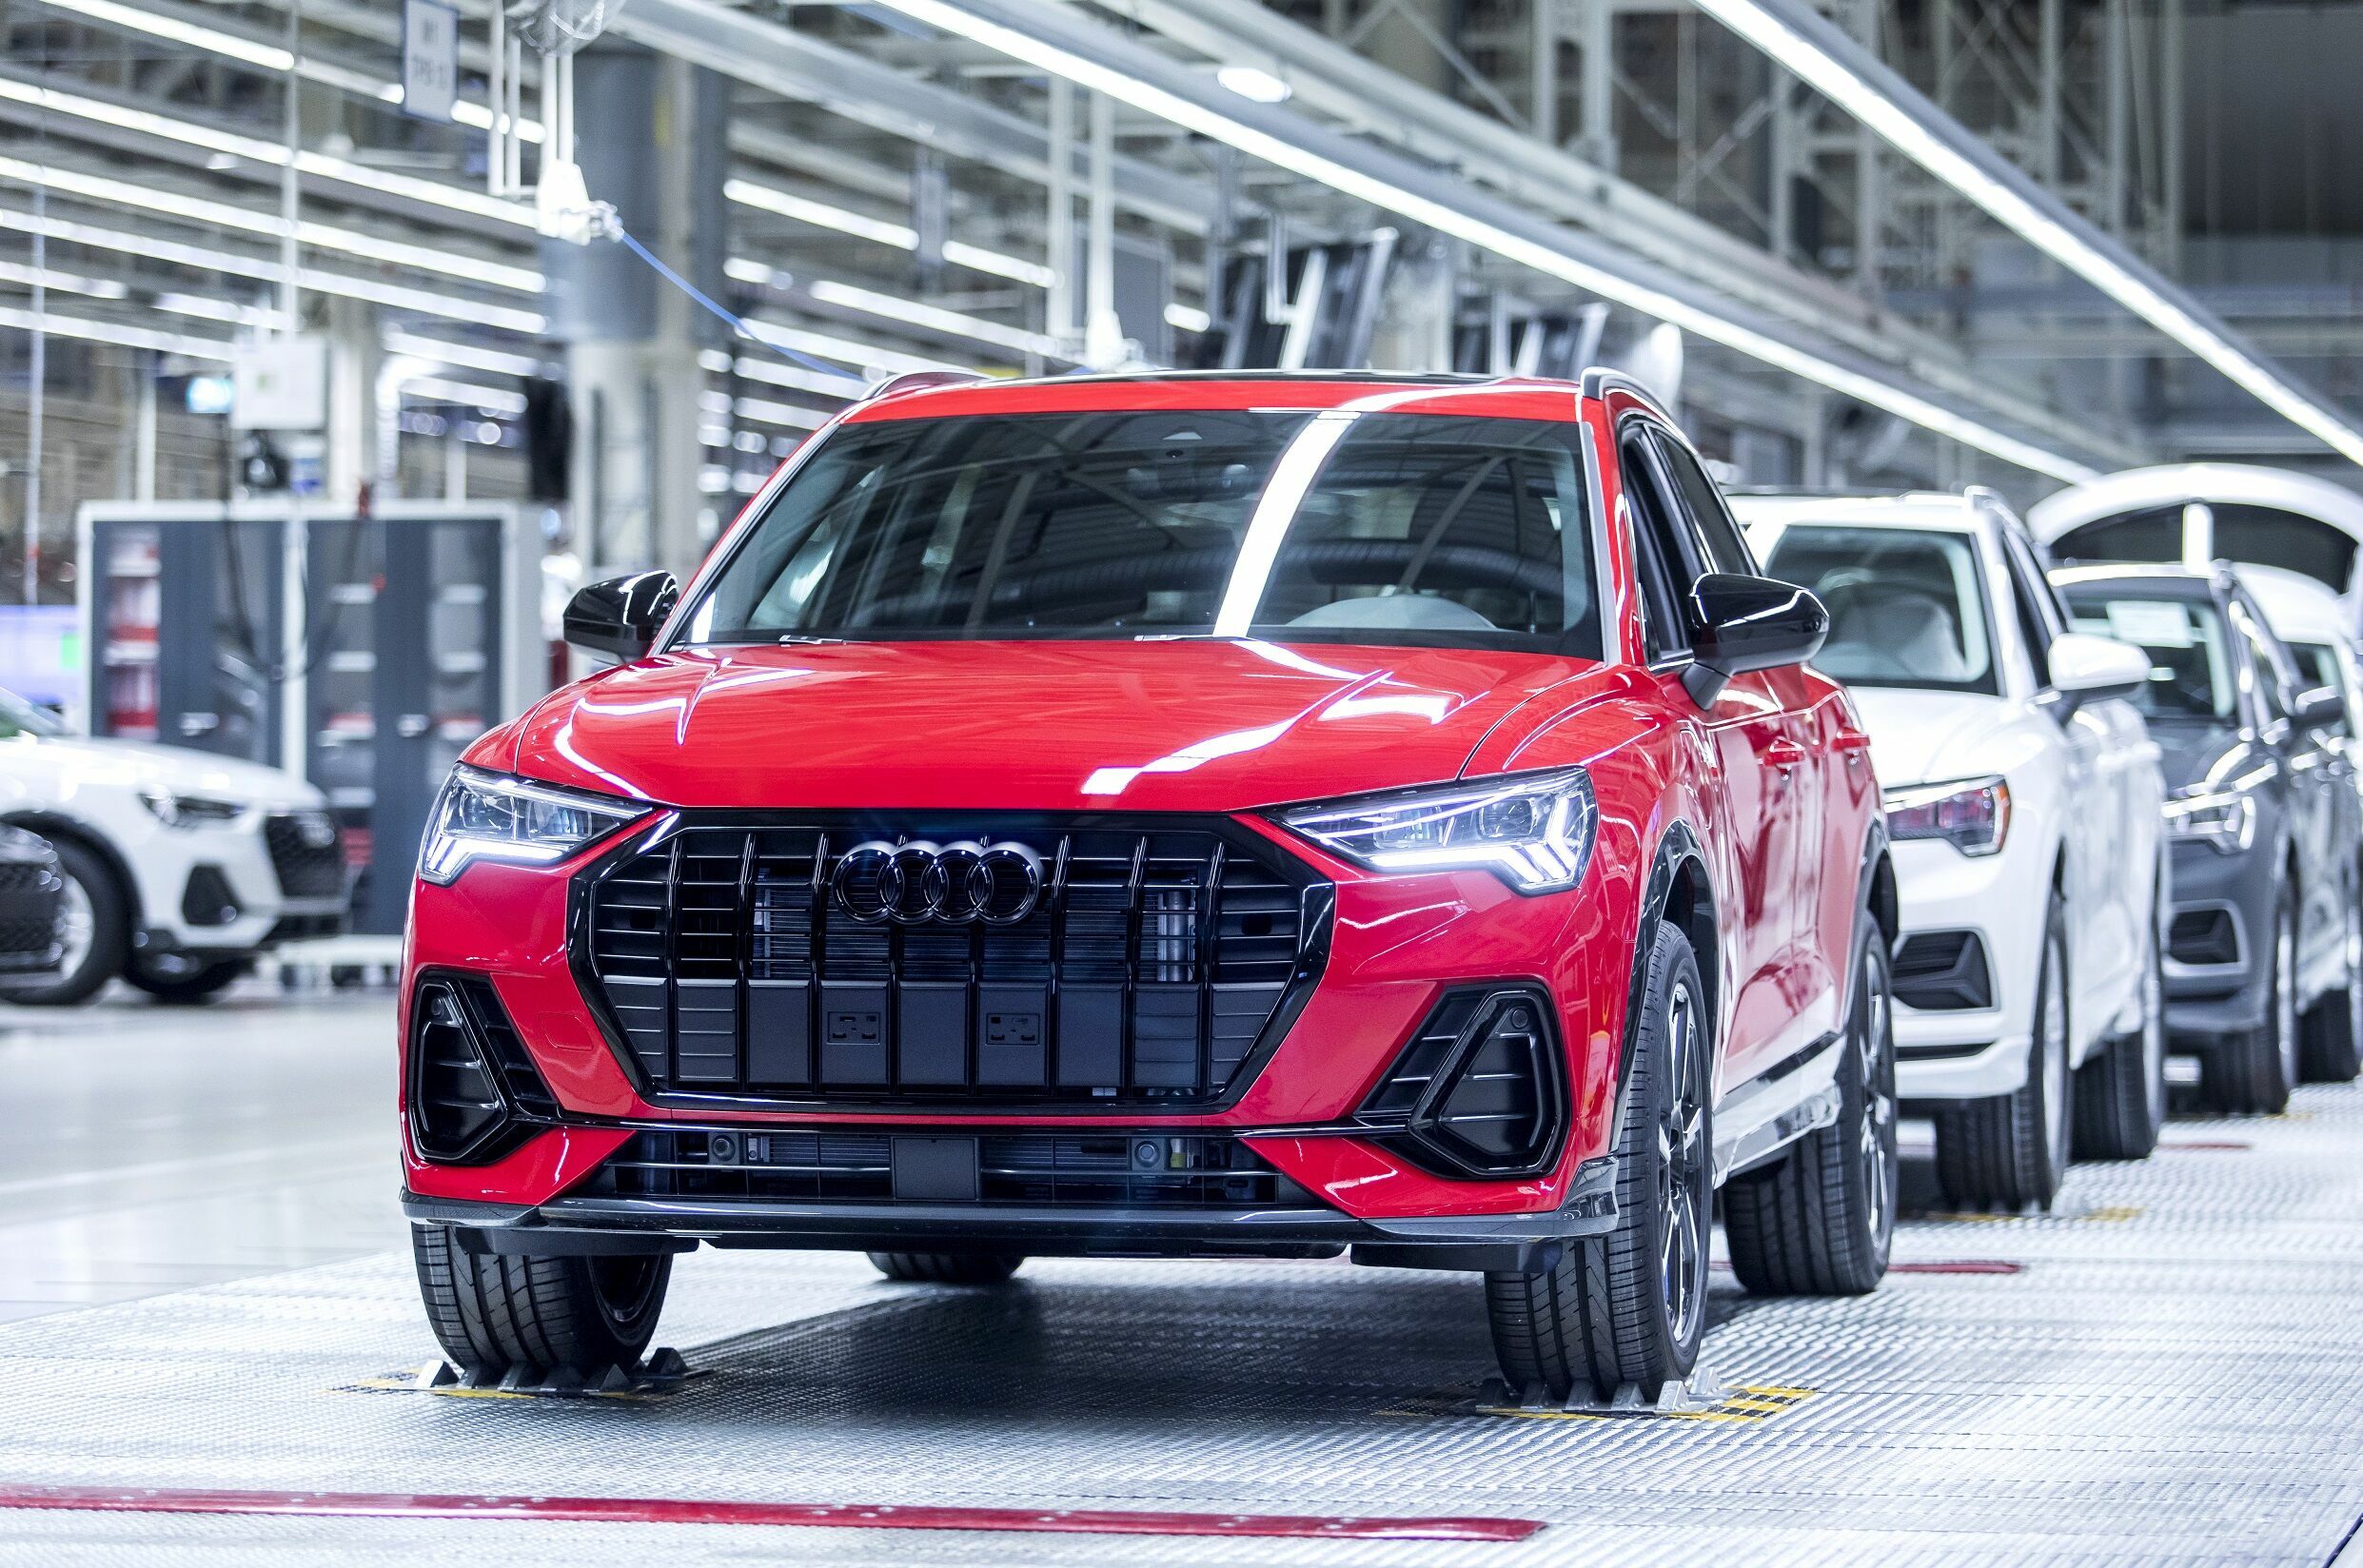 Audi Hungaria: A quarter million Audi Q3s from Győr to the world